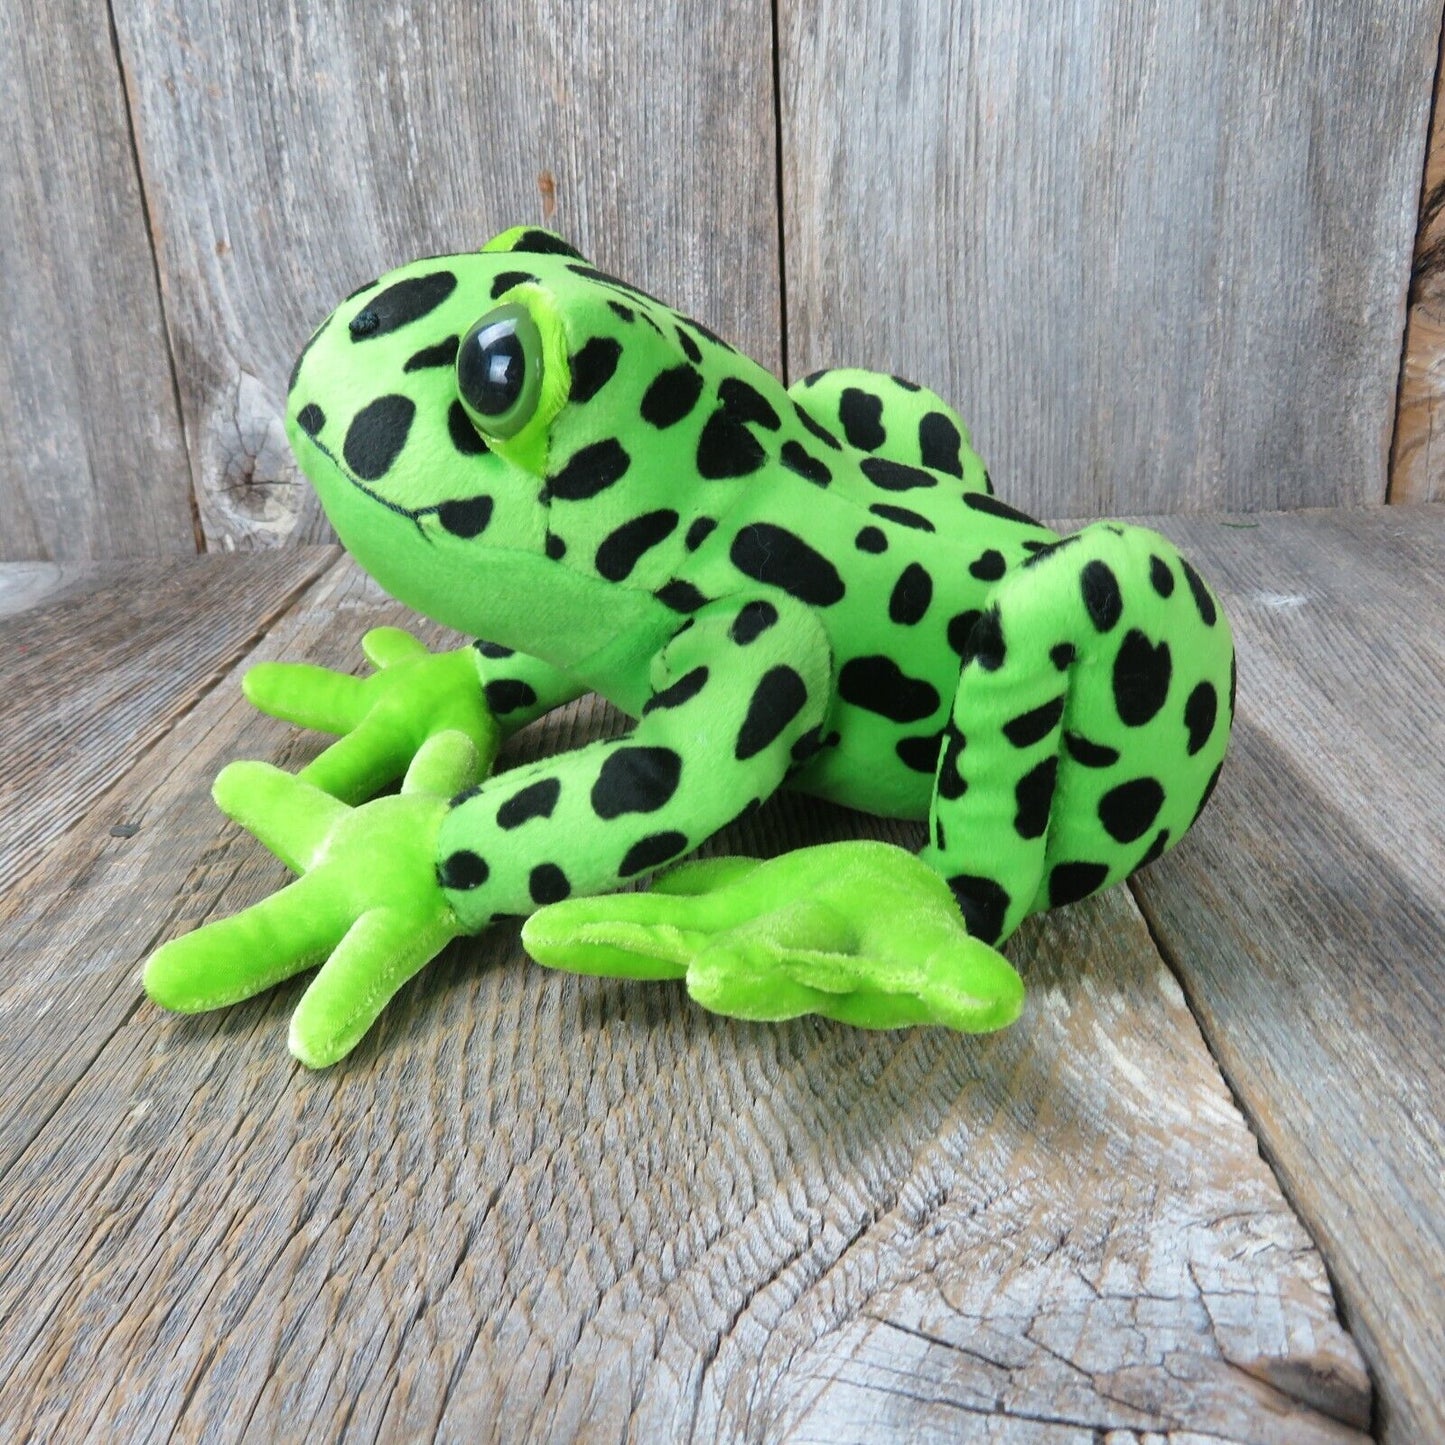 Green Spotted Poison Arrow Frog Plush Fiesta Toys Realistic Stuffed Animal